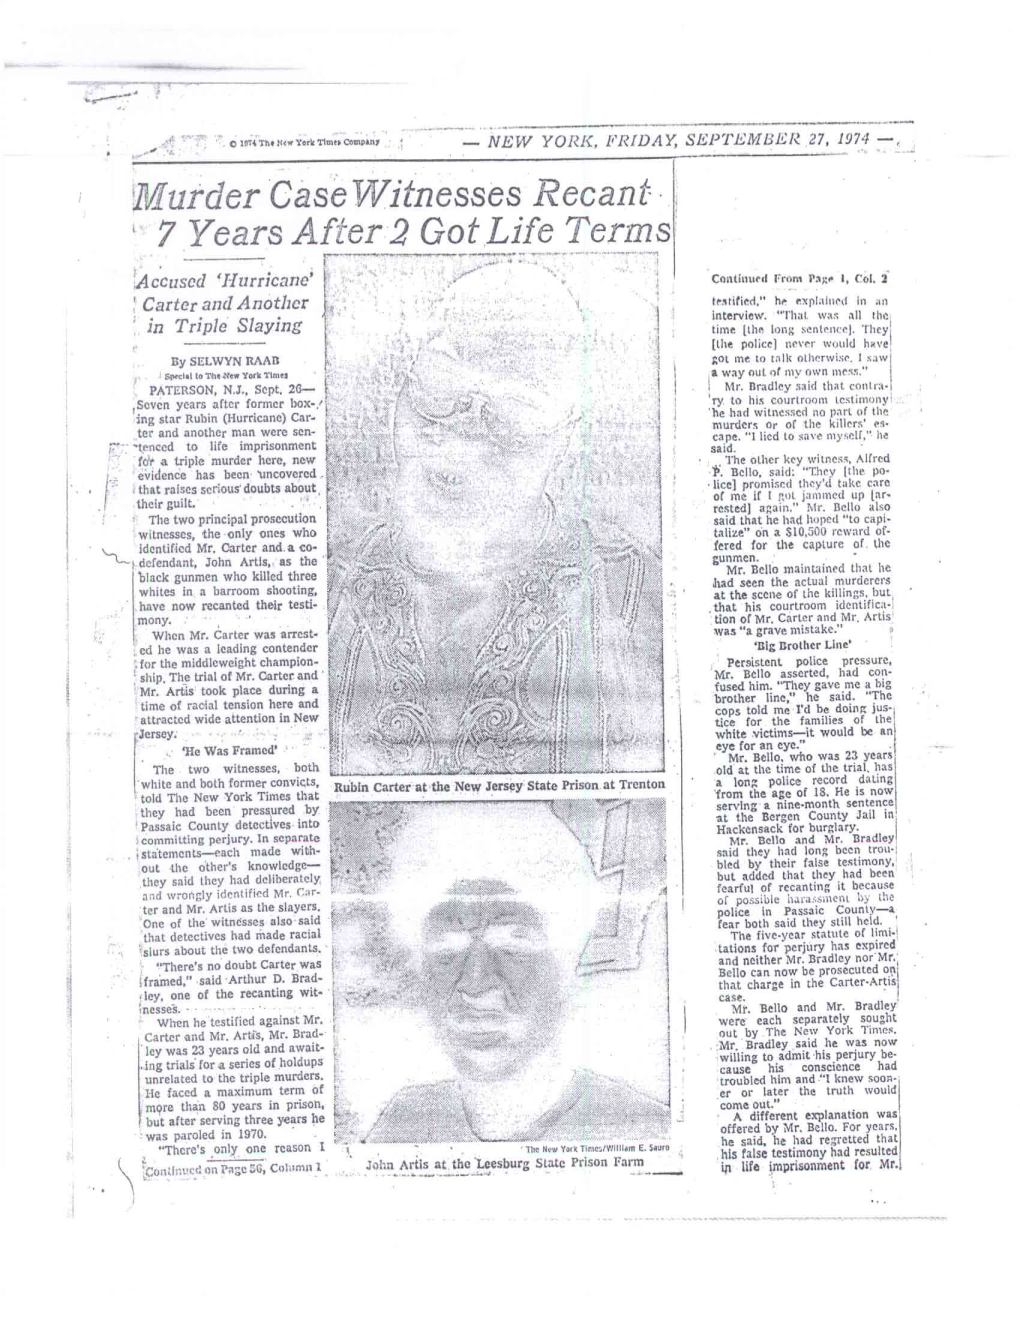 Murder Case Witnesses Recant 7 Years After 2 Got Life Terms Accused 'Hurricane' Cniitimied from Page 1, Col, 3